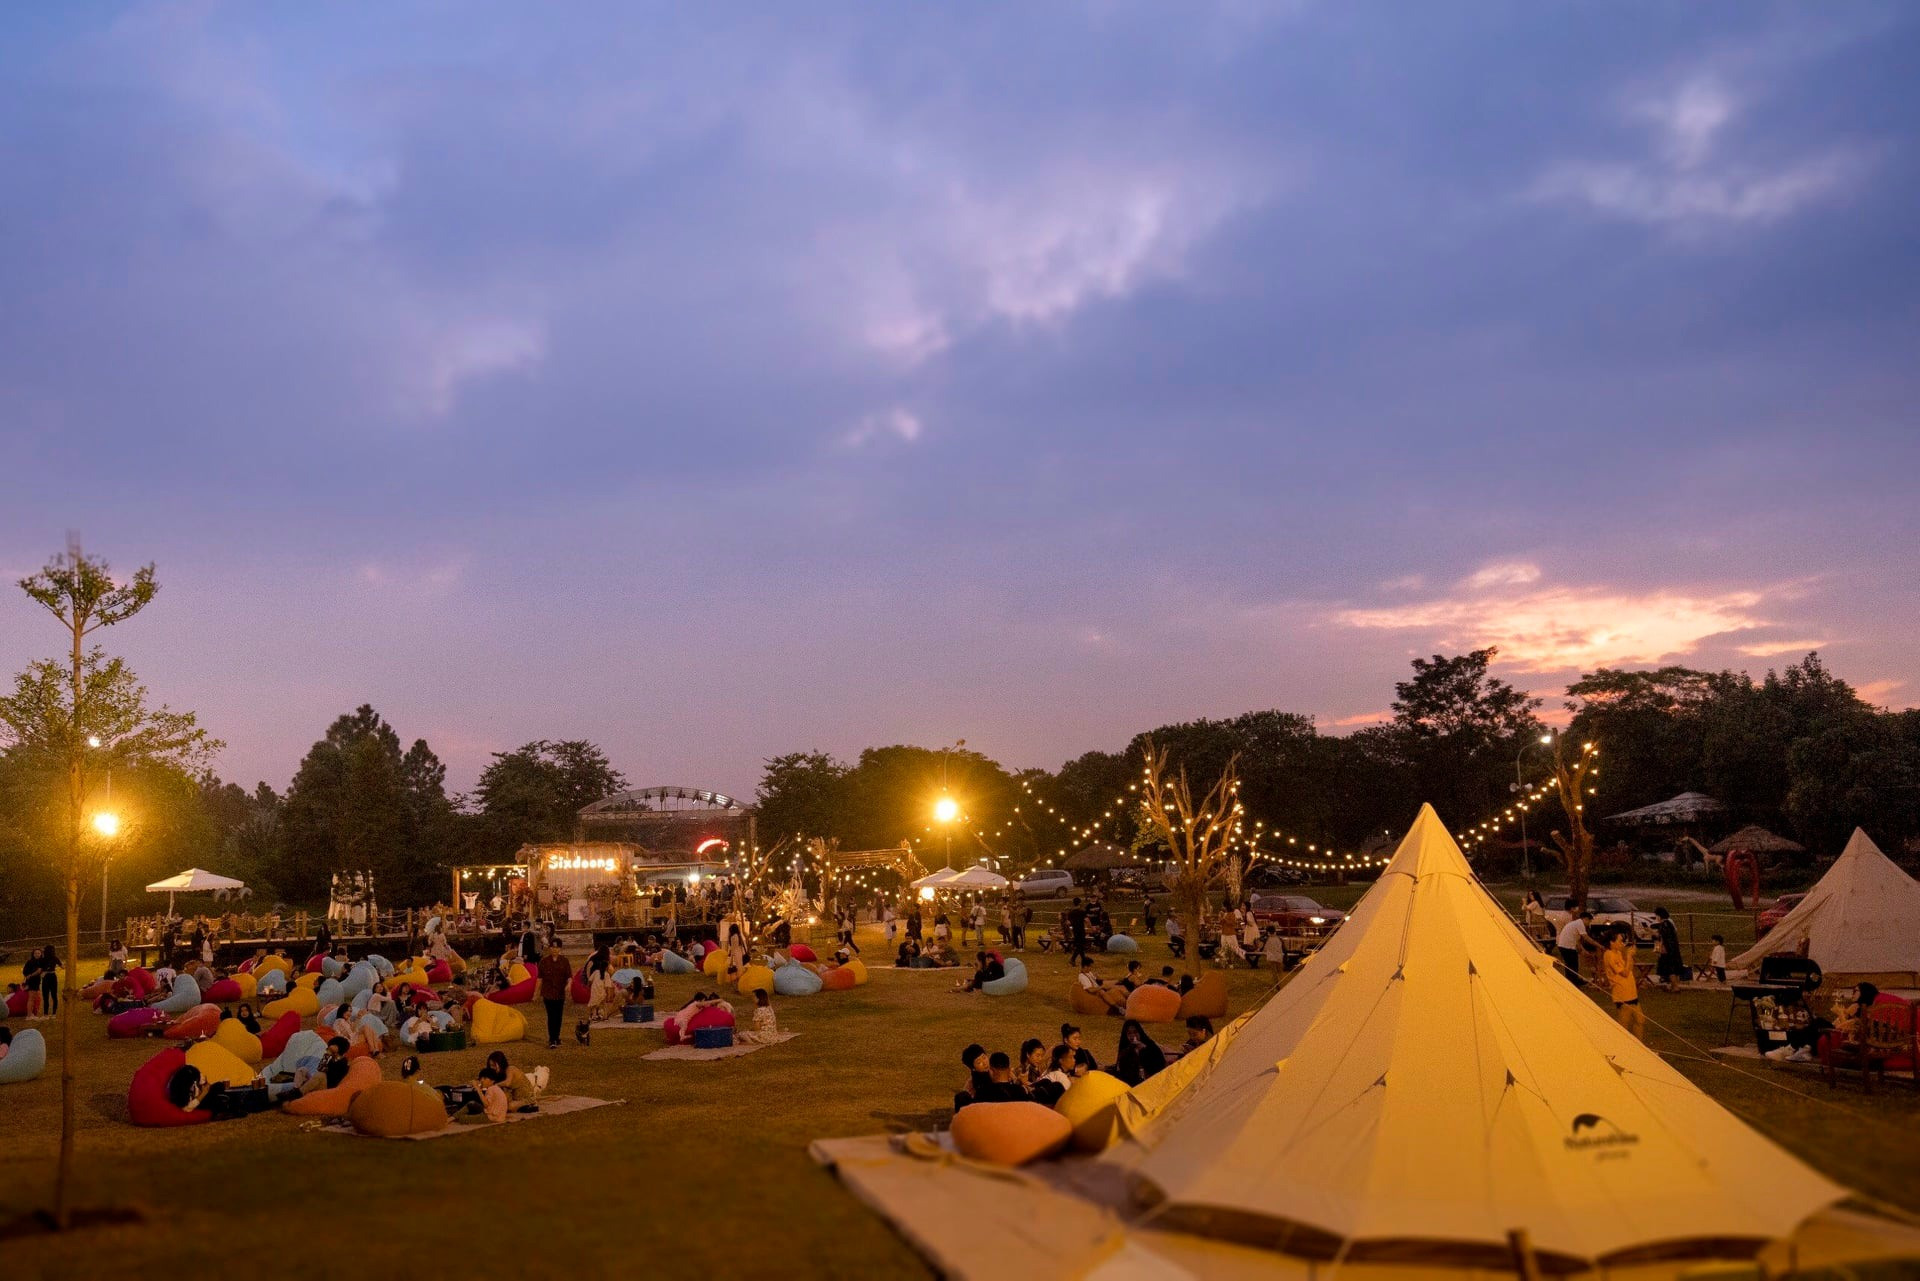 Sixdoong Cafe & Camping